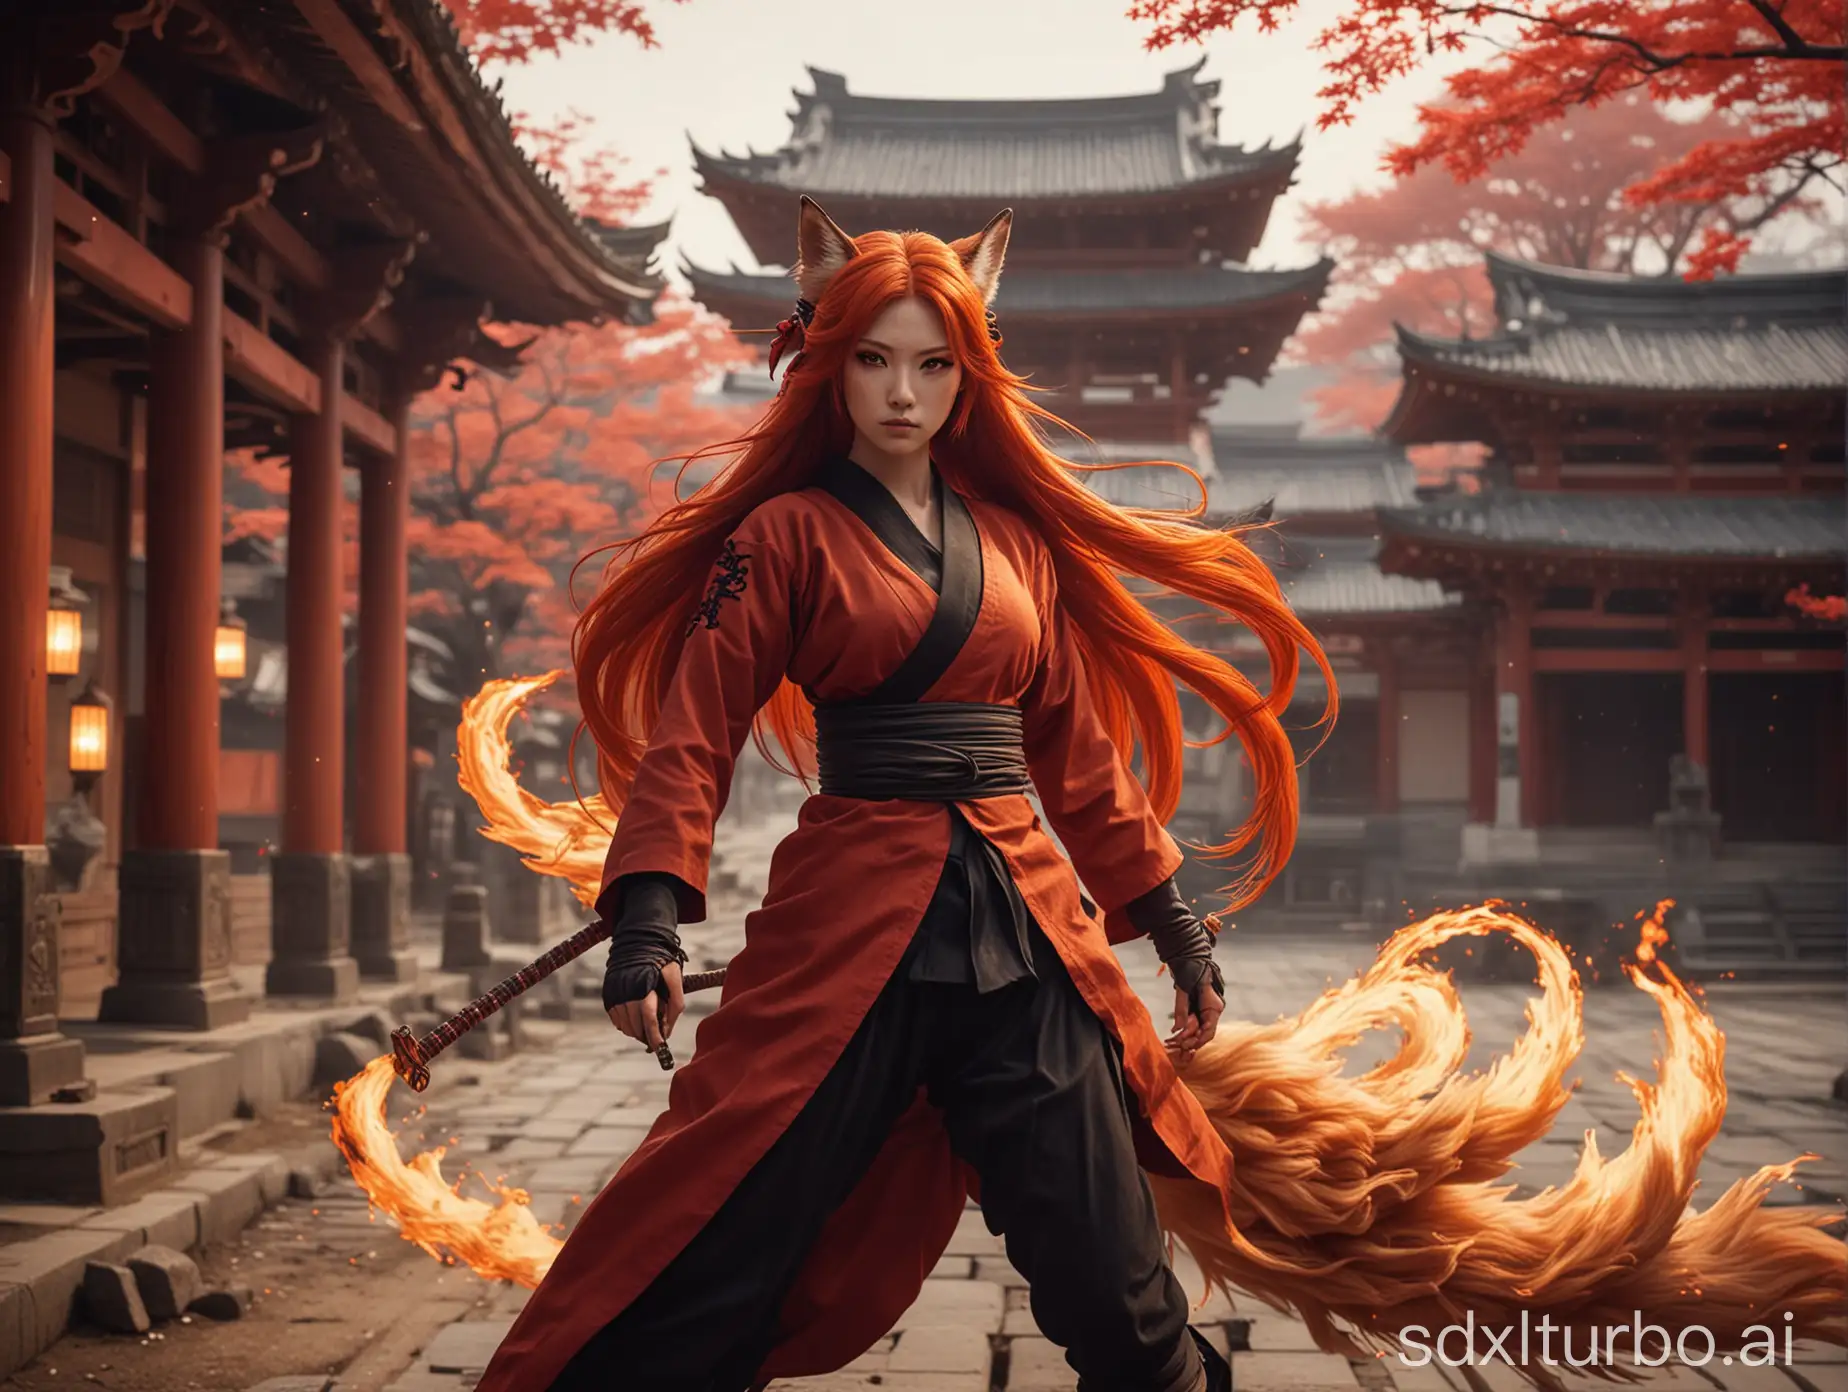 a Japanese ninja nine tails fox-girl, long red fire hair, aesthetic ancient temple background, high quality, high resolution, high precision, realism, color correction, proper lighting settings, harmonious composition